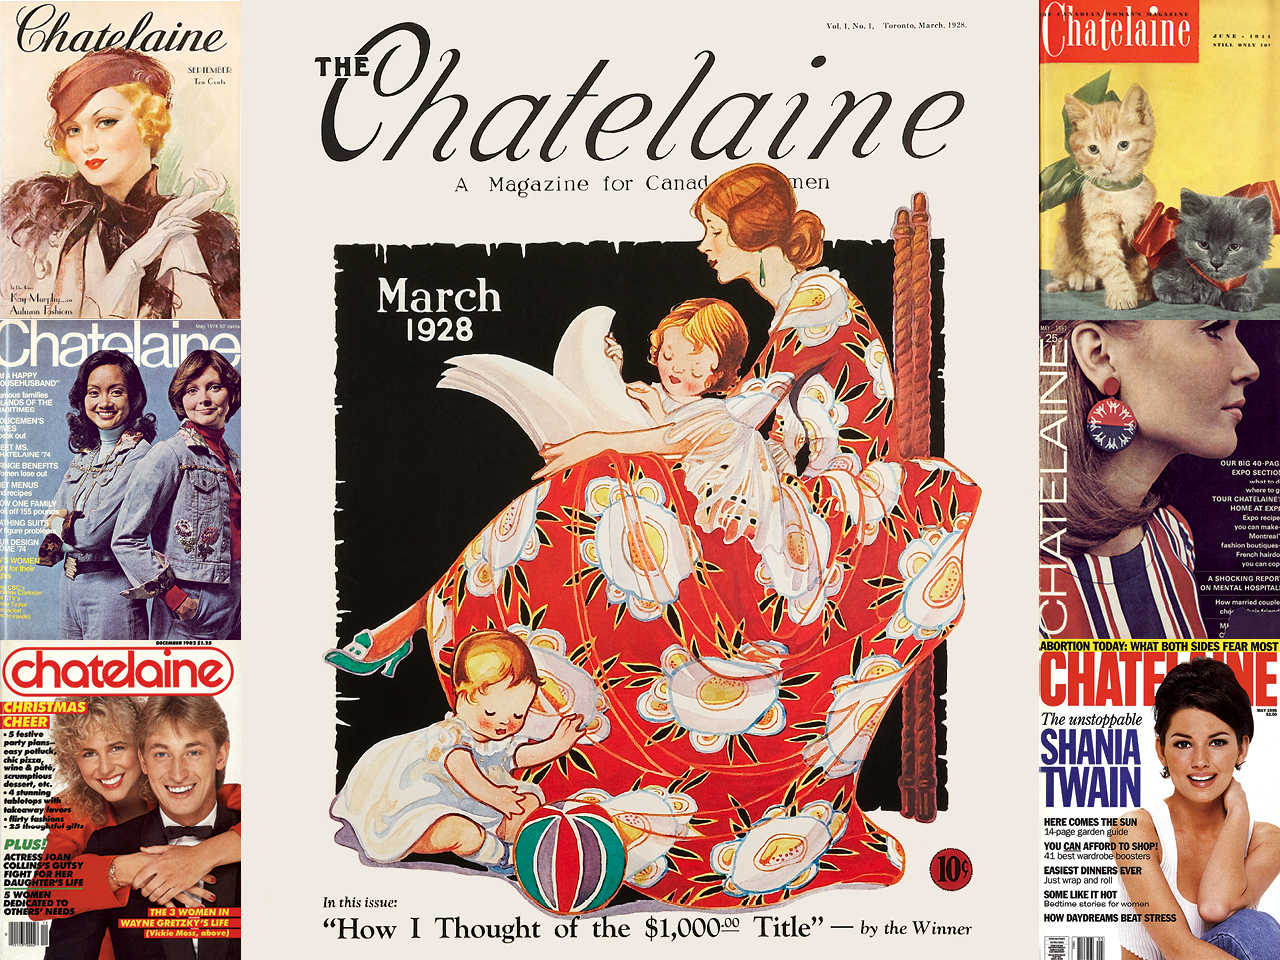 A compilation of archival Chatelaine covers from 1928 to present day